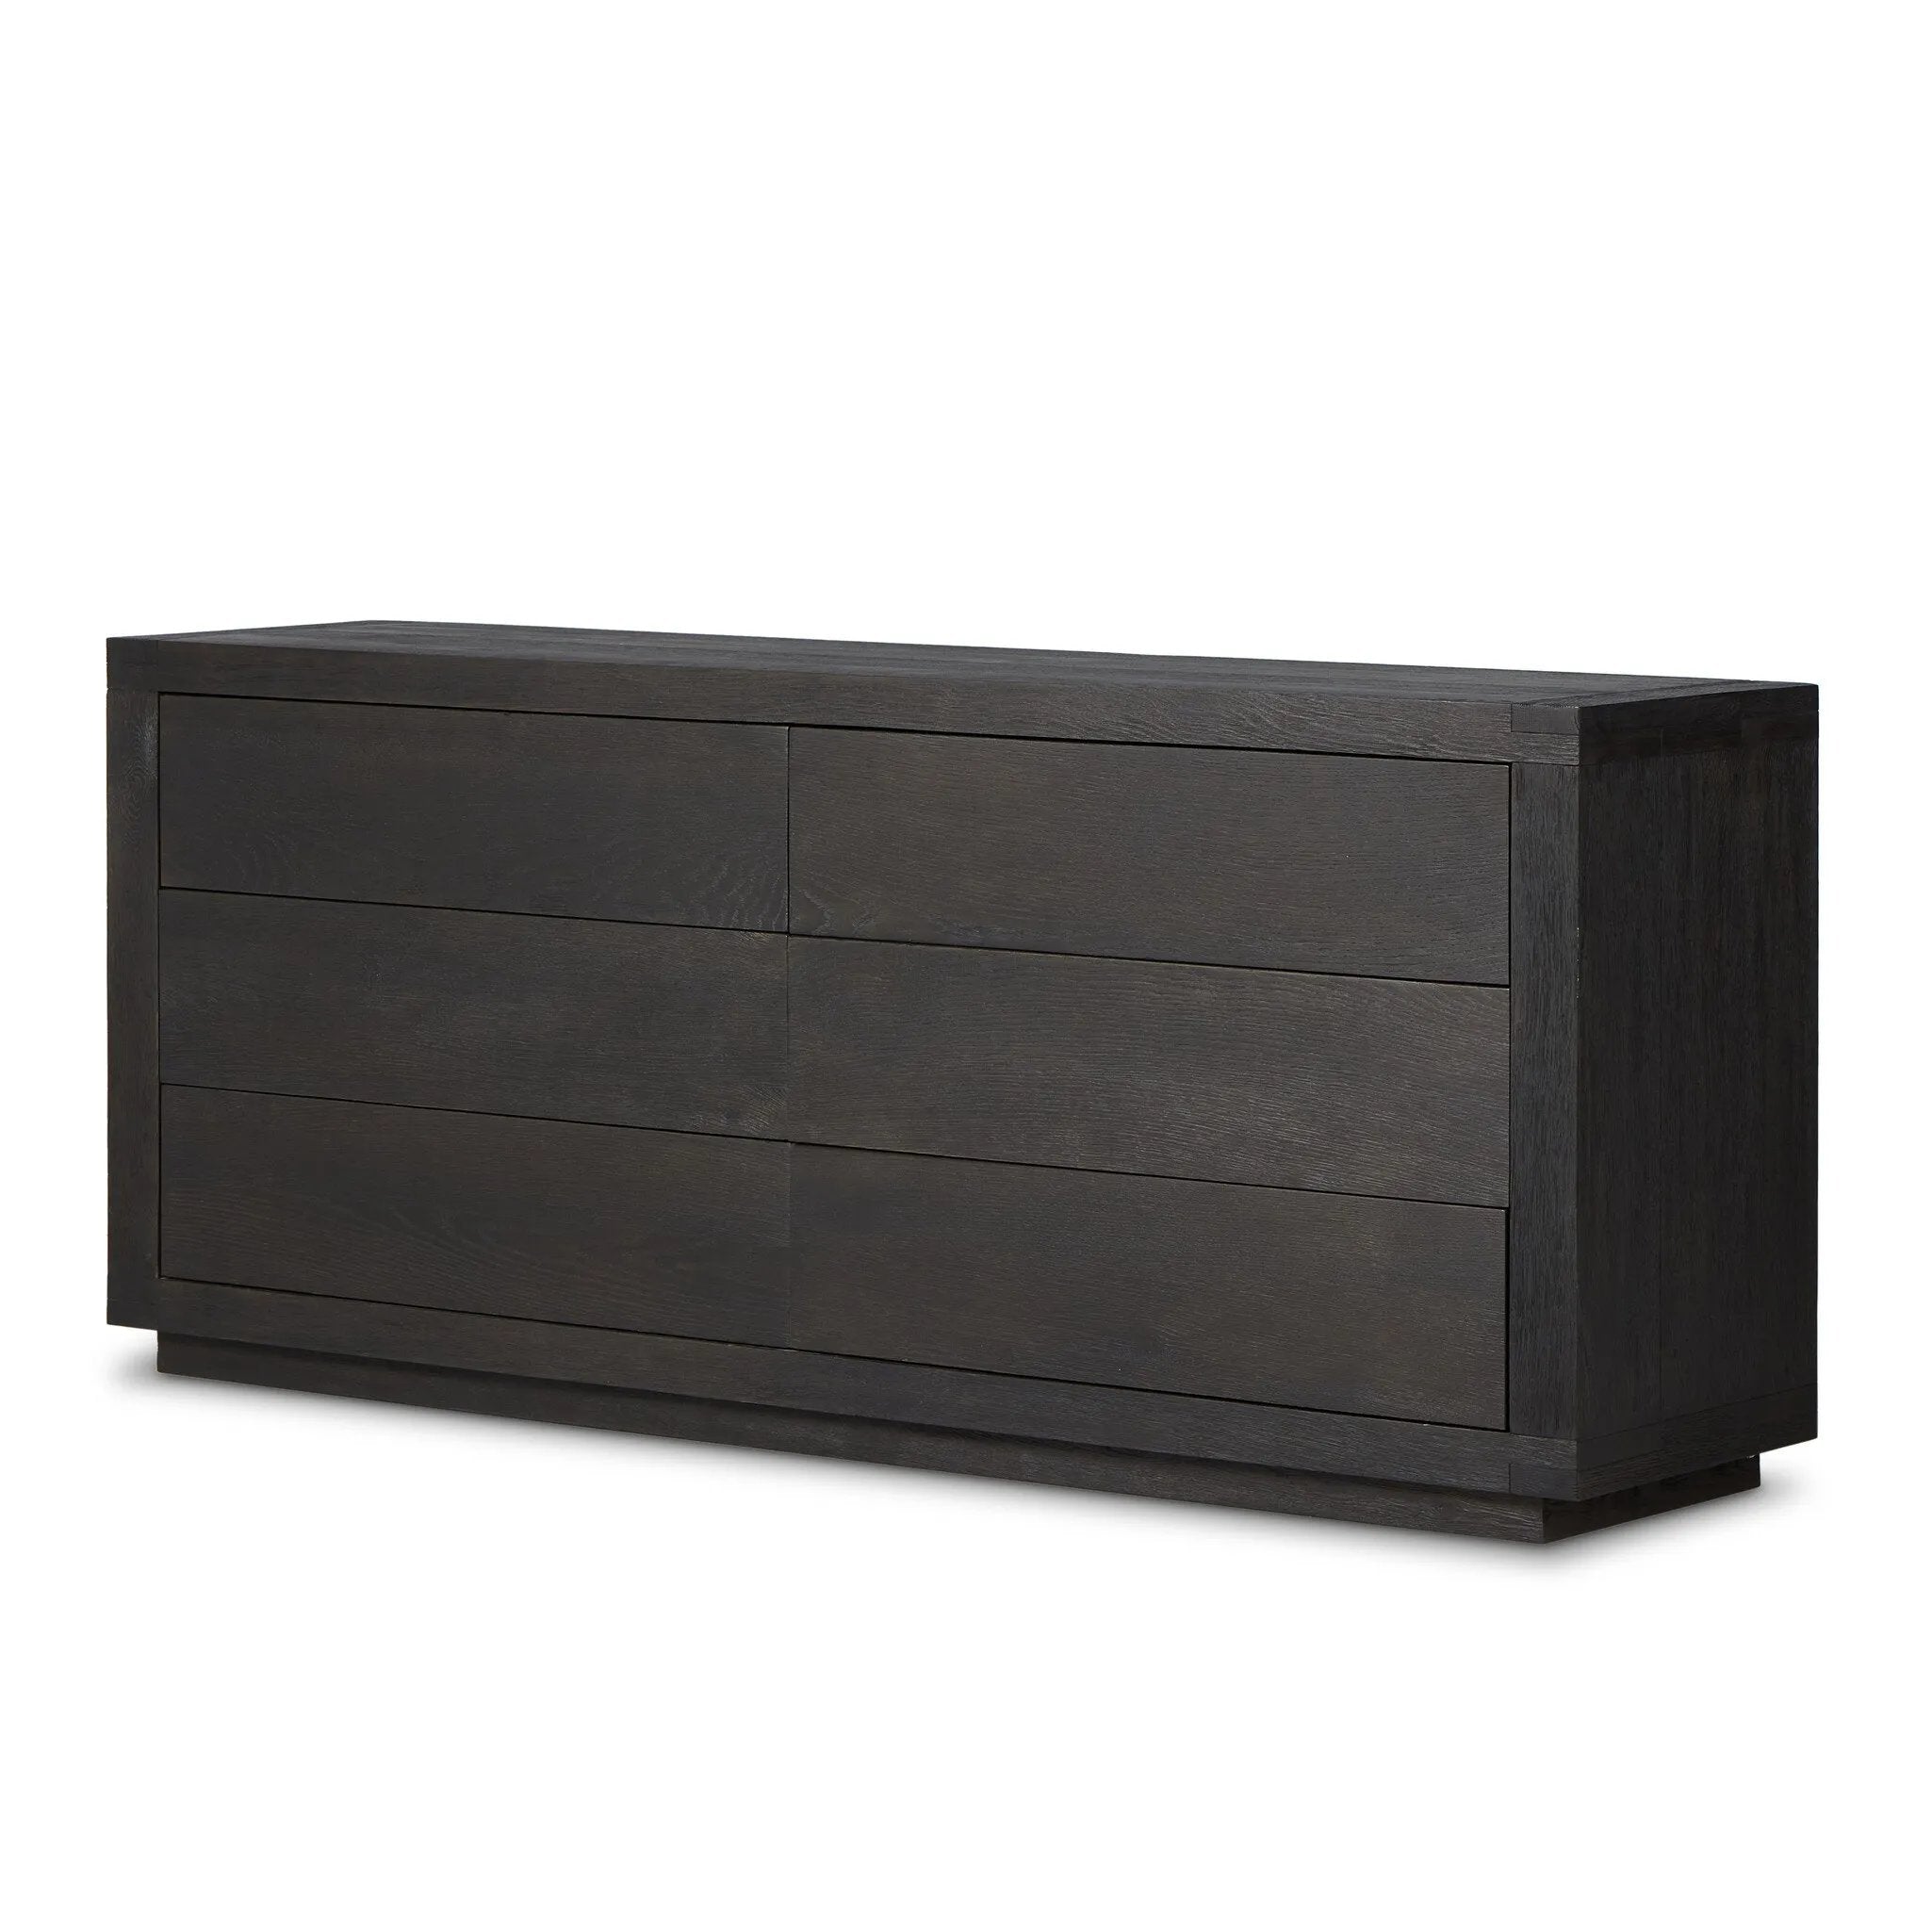 Black-finished oak shapes a streamlined box-style dresser, with lap joint corners for a detail-driven touch.Collection: Bennet Amethyst Home provides interior design, new home construction design consulting, vintage area rugs, and lighting in the Houston metro area.